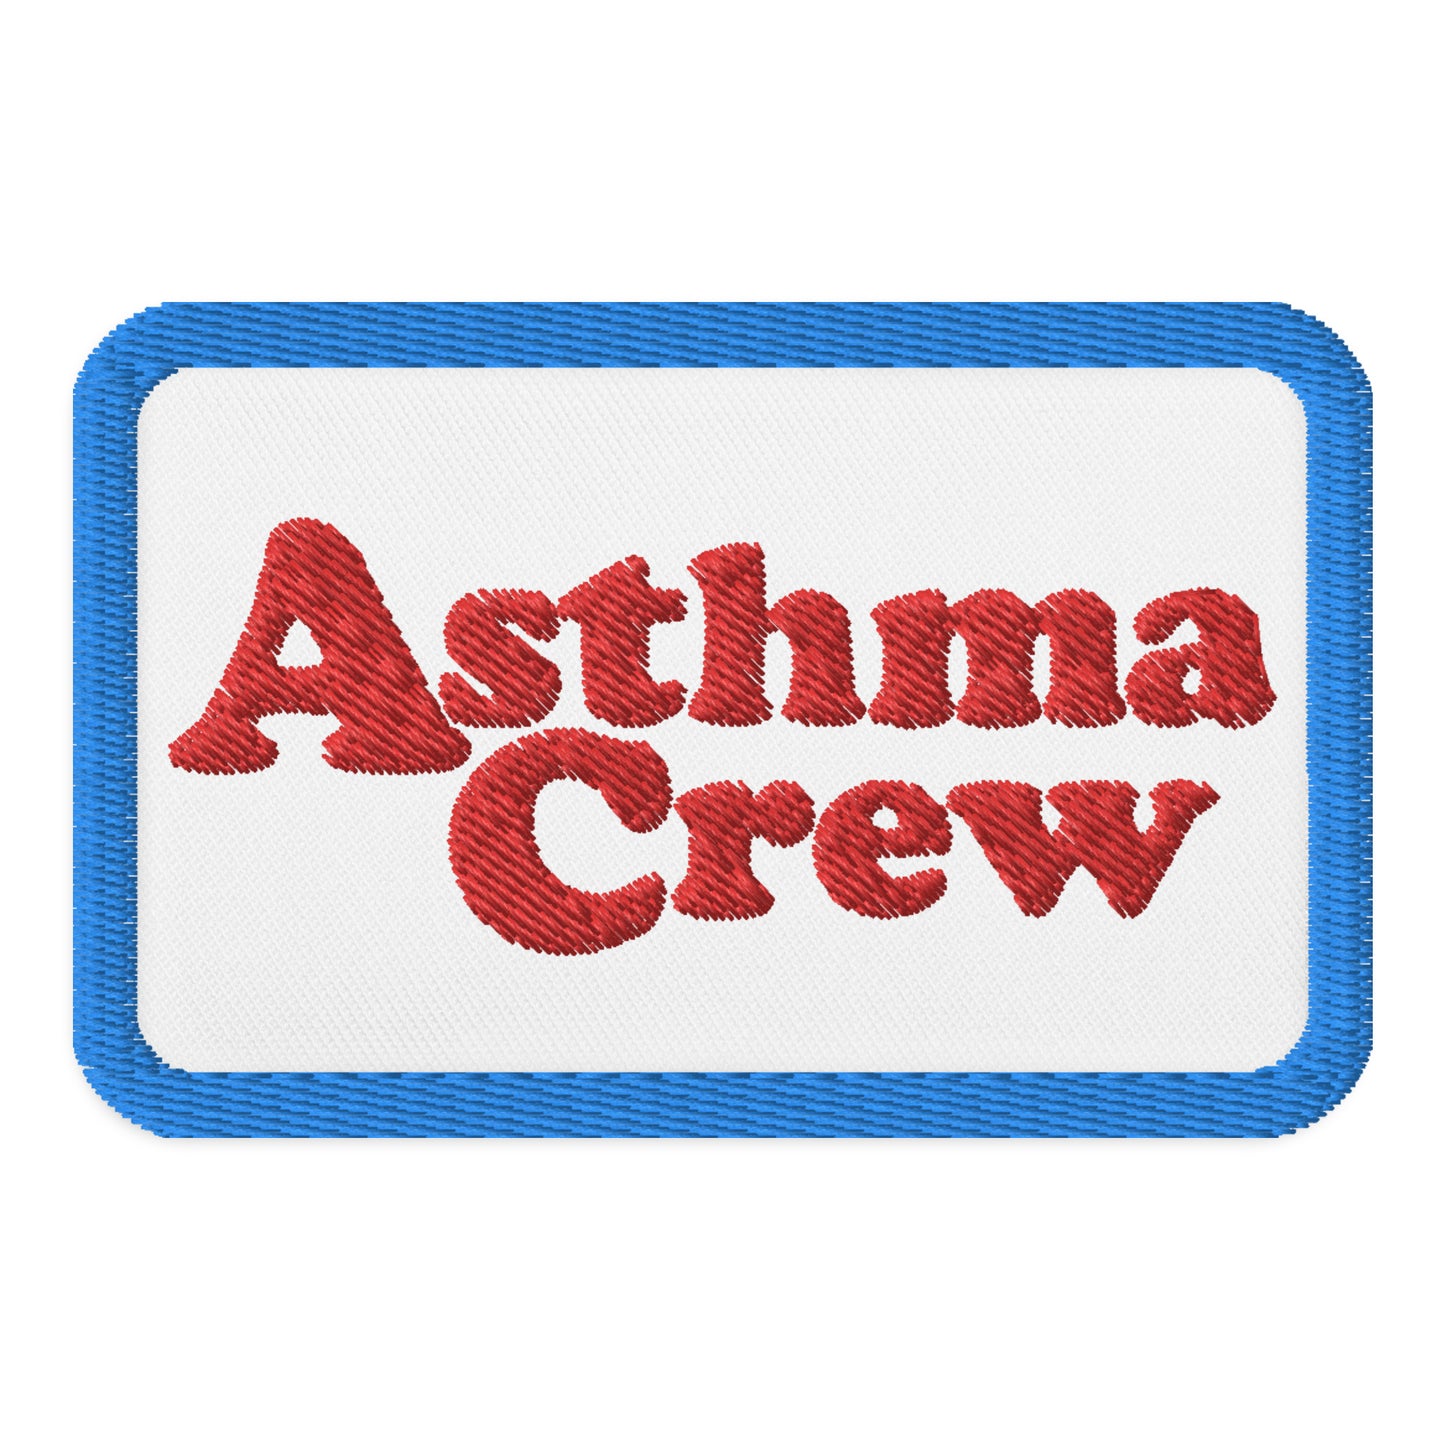 Asthma Crew - Embroidered patch